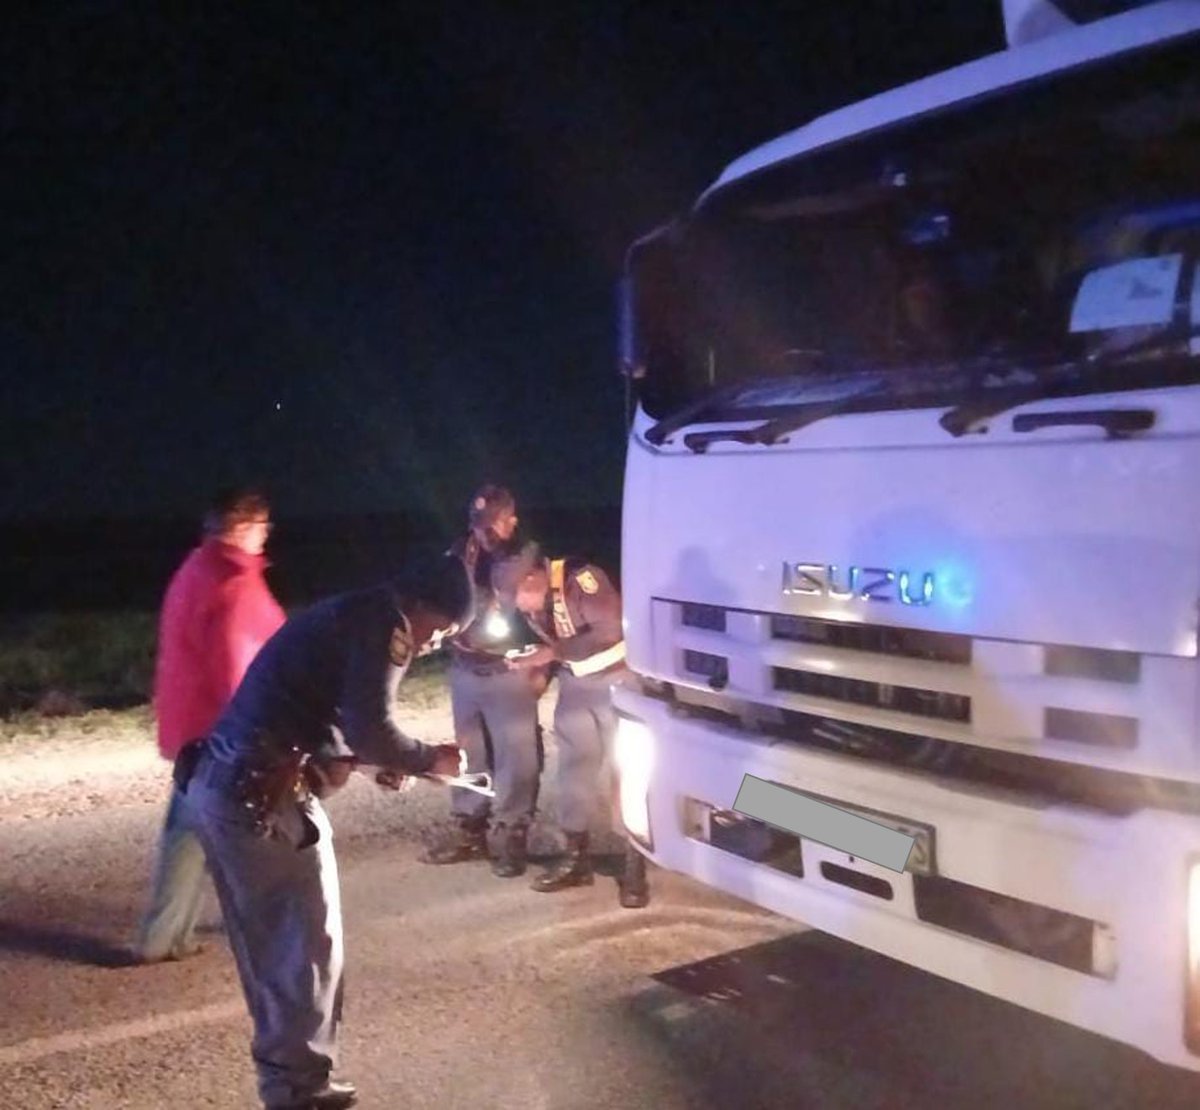 #sapsFS #SAPS Bultfontein, Hoopstad, Wesselsbron #RuralSafety coordinators through joint efforts with #farmers conducted a vehicle checkpoint in a joint operation on 23/04 in Bultfontein. #PartnershipPolicing #PoliceVisibility ME
saps.gov.za/newsroom/msspe…